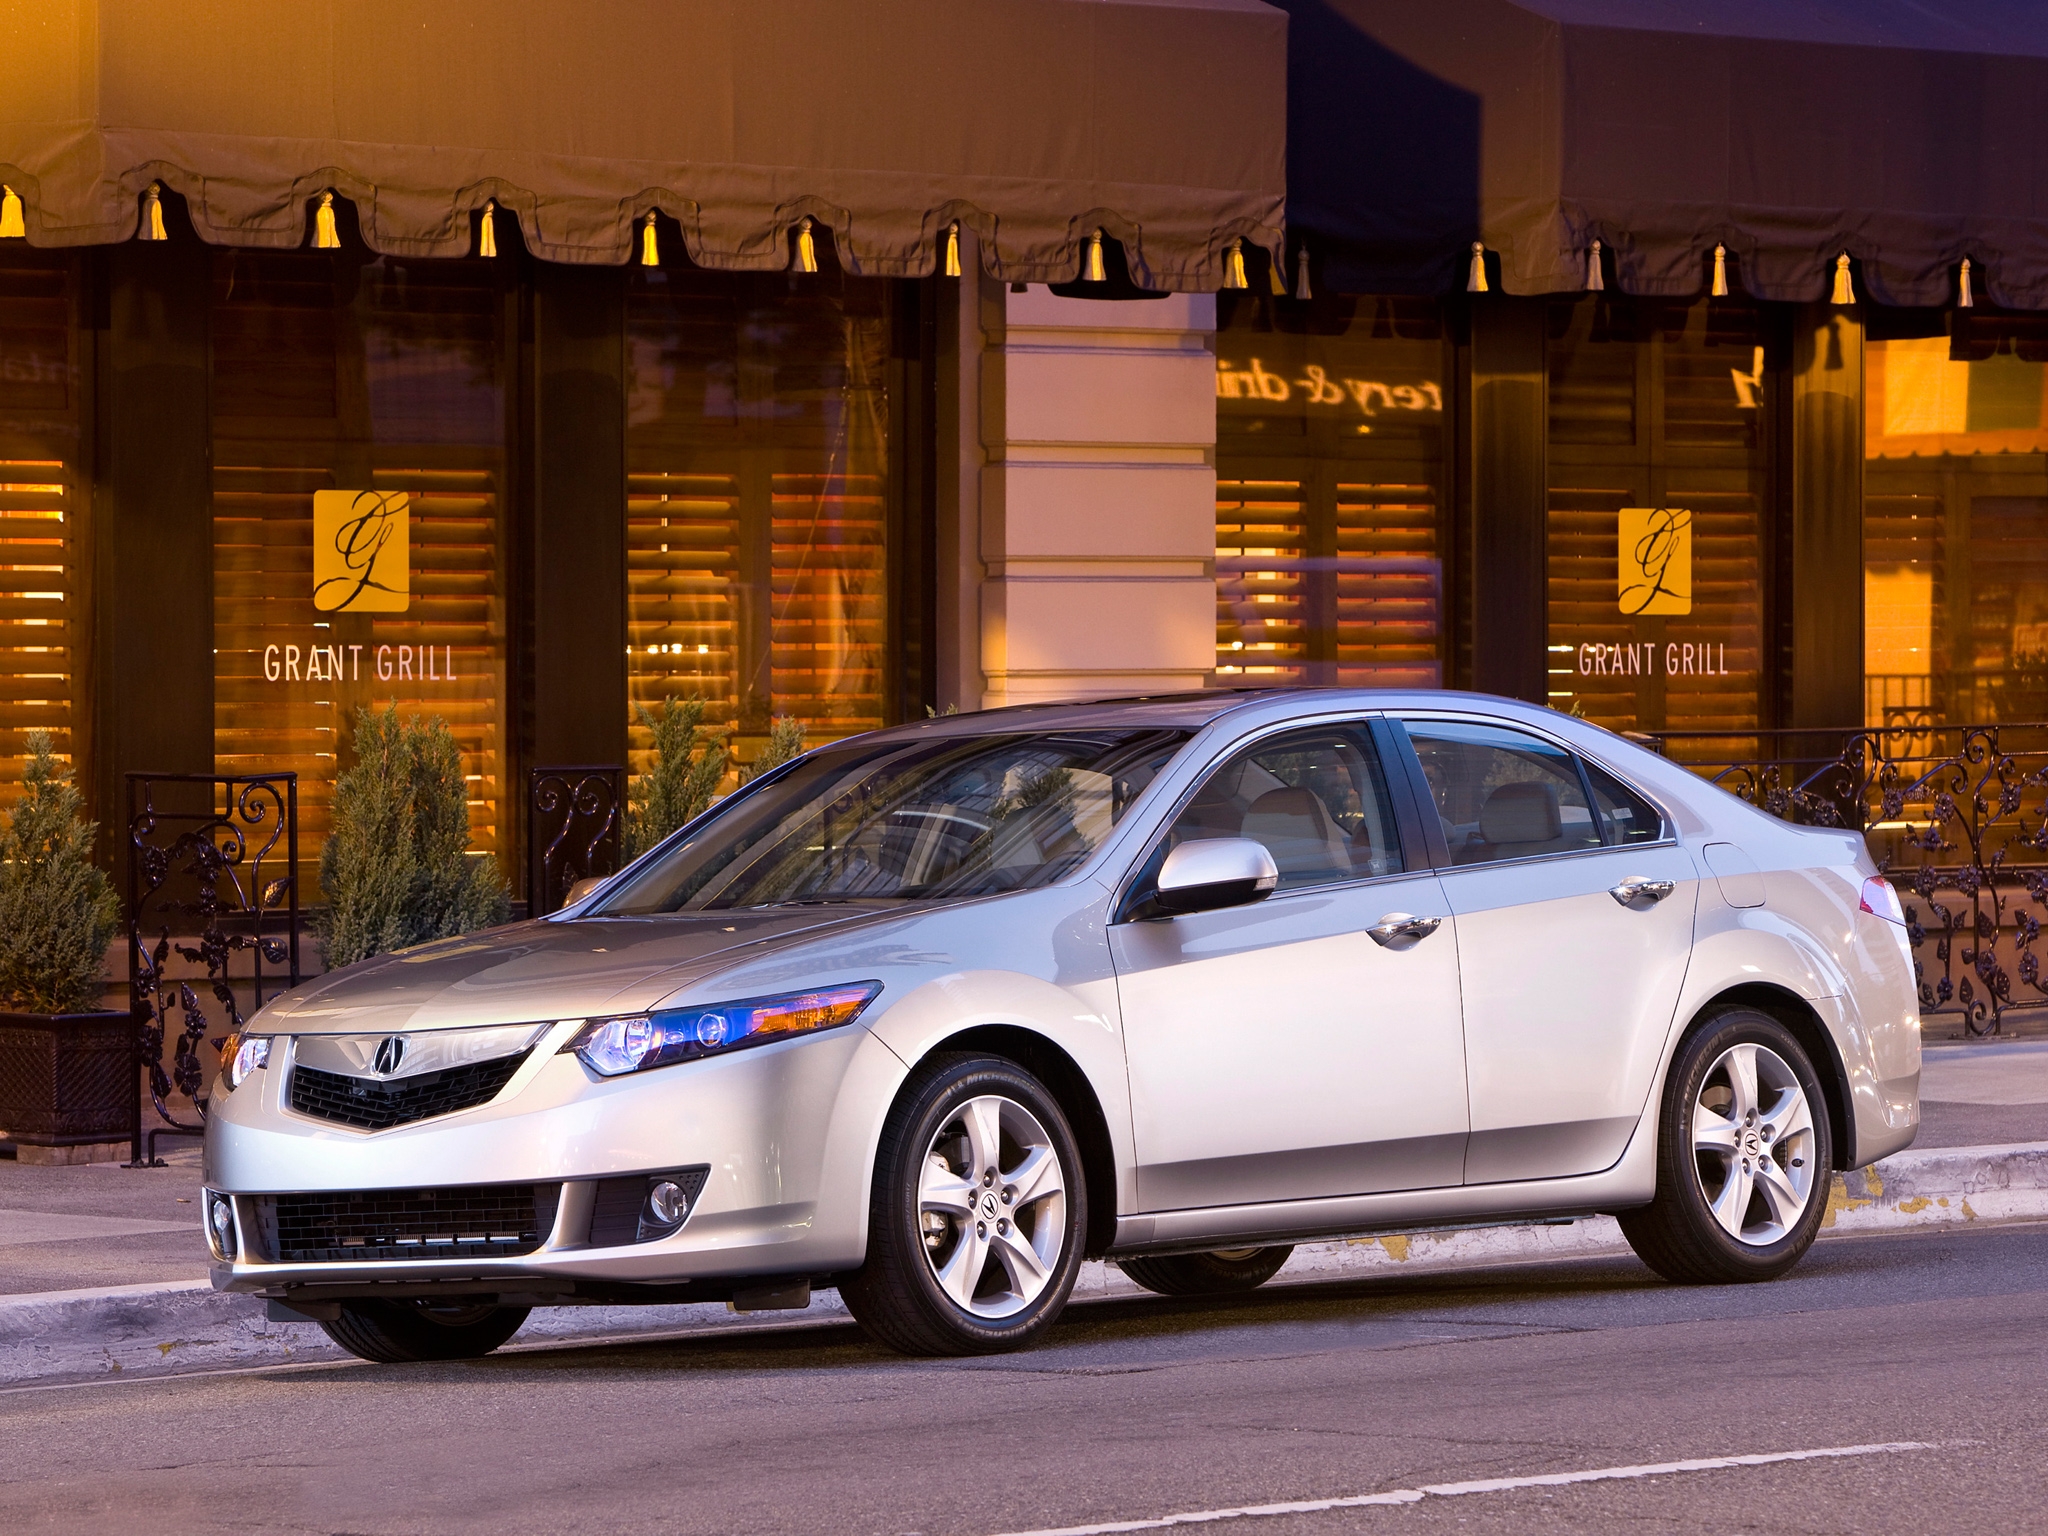 side view, auto, acura, cars, building, asphalt, style, akura, 2008, street, silver metallic, tsx cell phone wallpapers